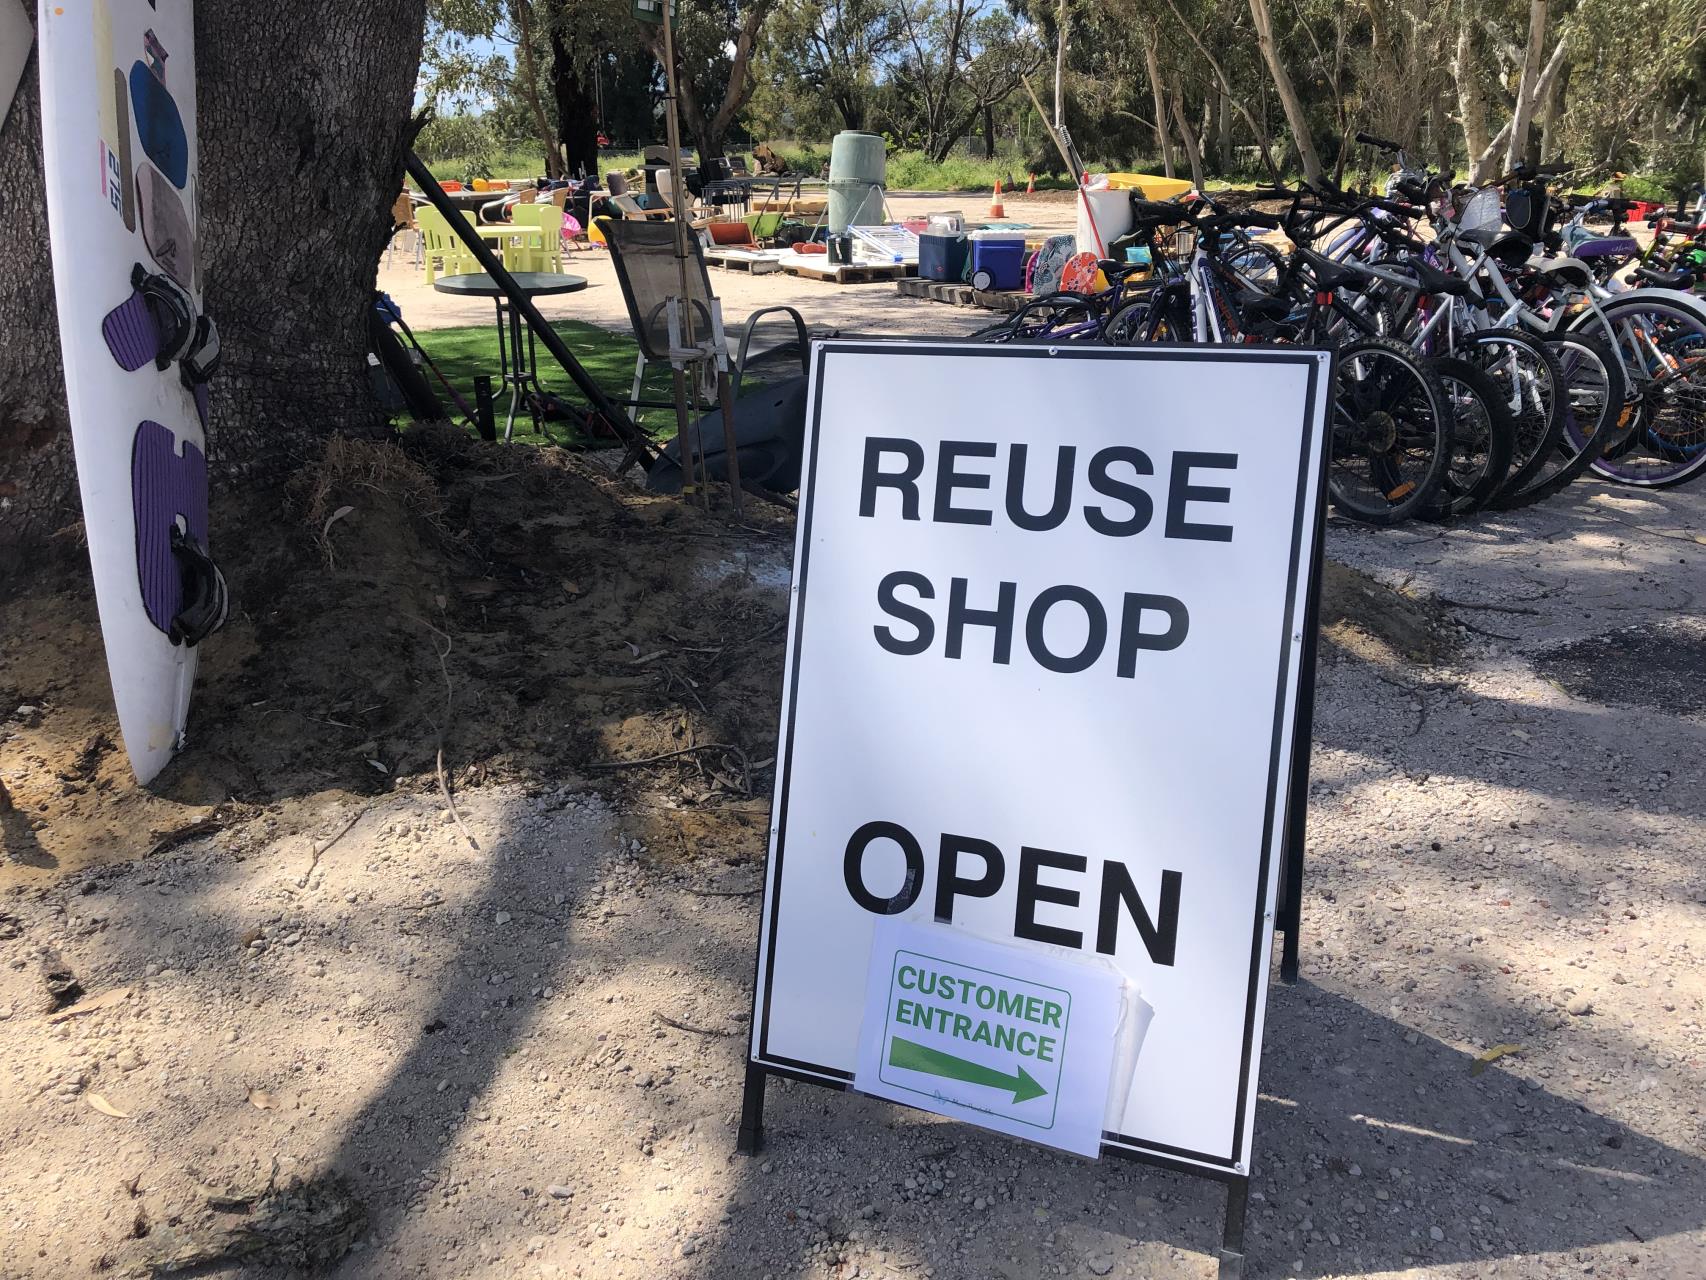 SJ Reuse Shop diverts hundreds of items from landfill on opening weekend